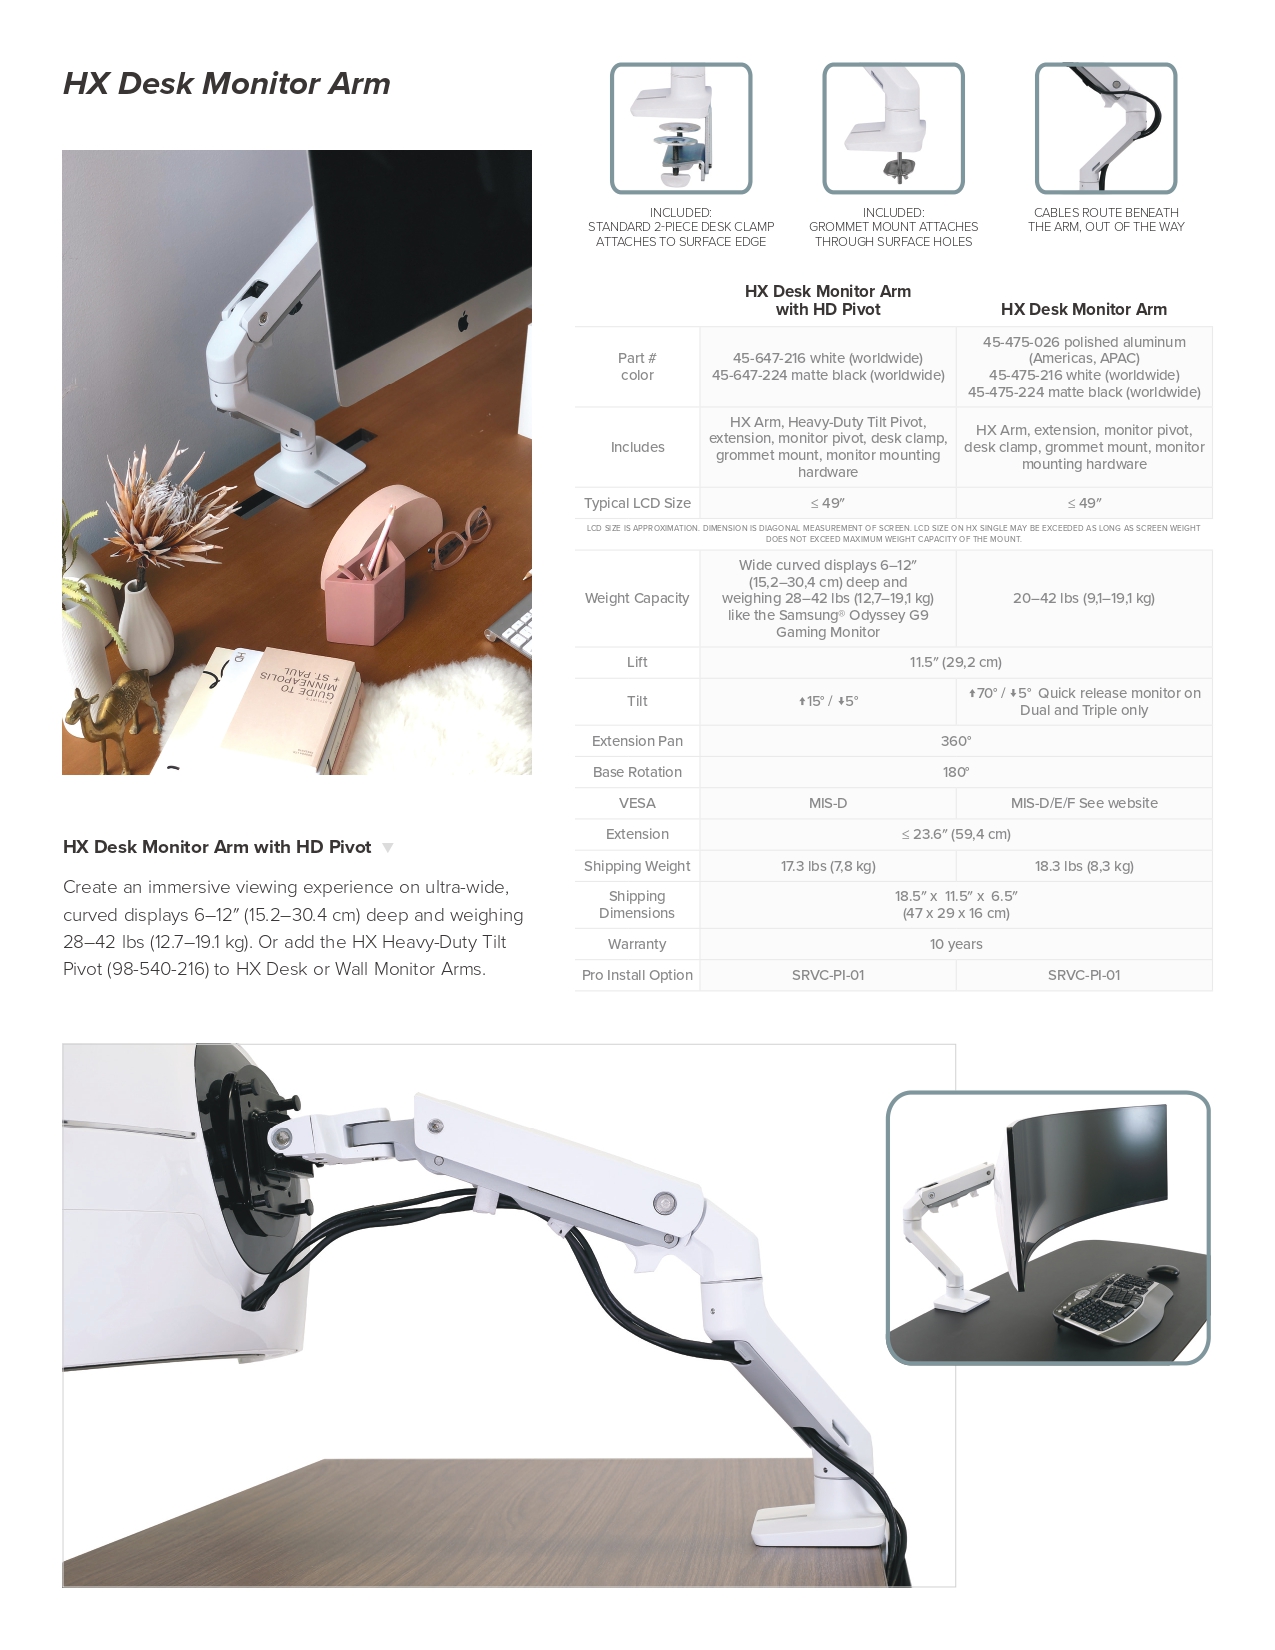 A large marketing image providing additional information about the product Ergotron HX Desk Dual Monitor Arm - White - Additional alt info not provided